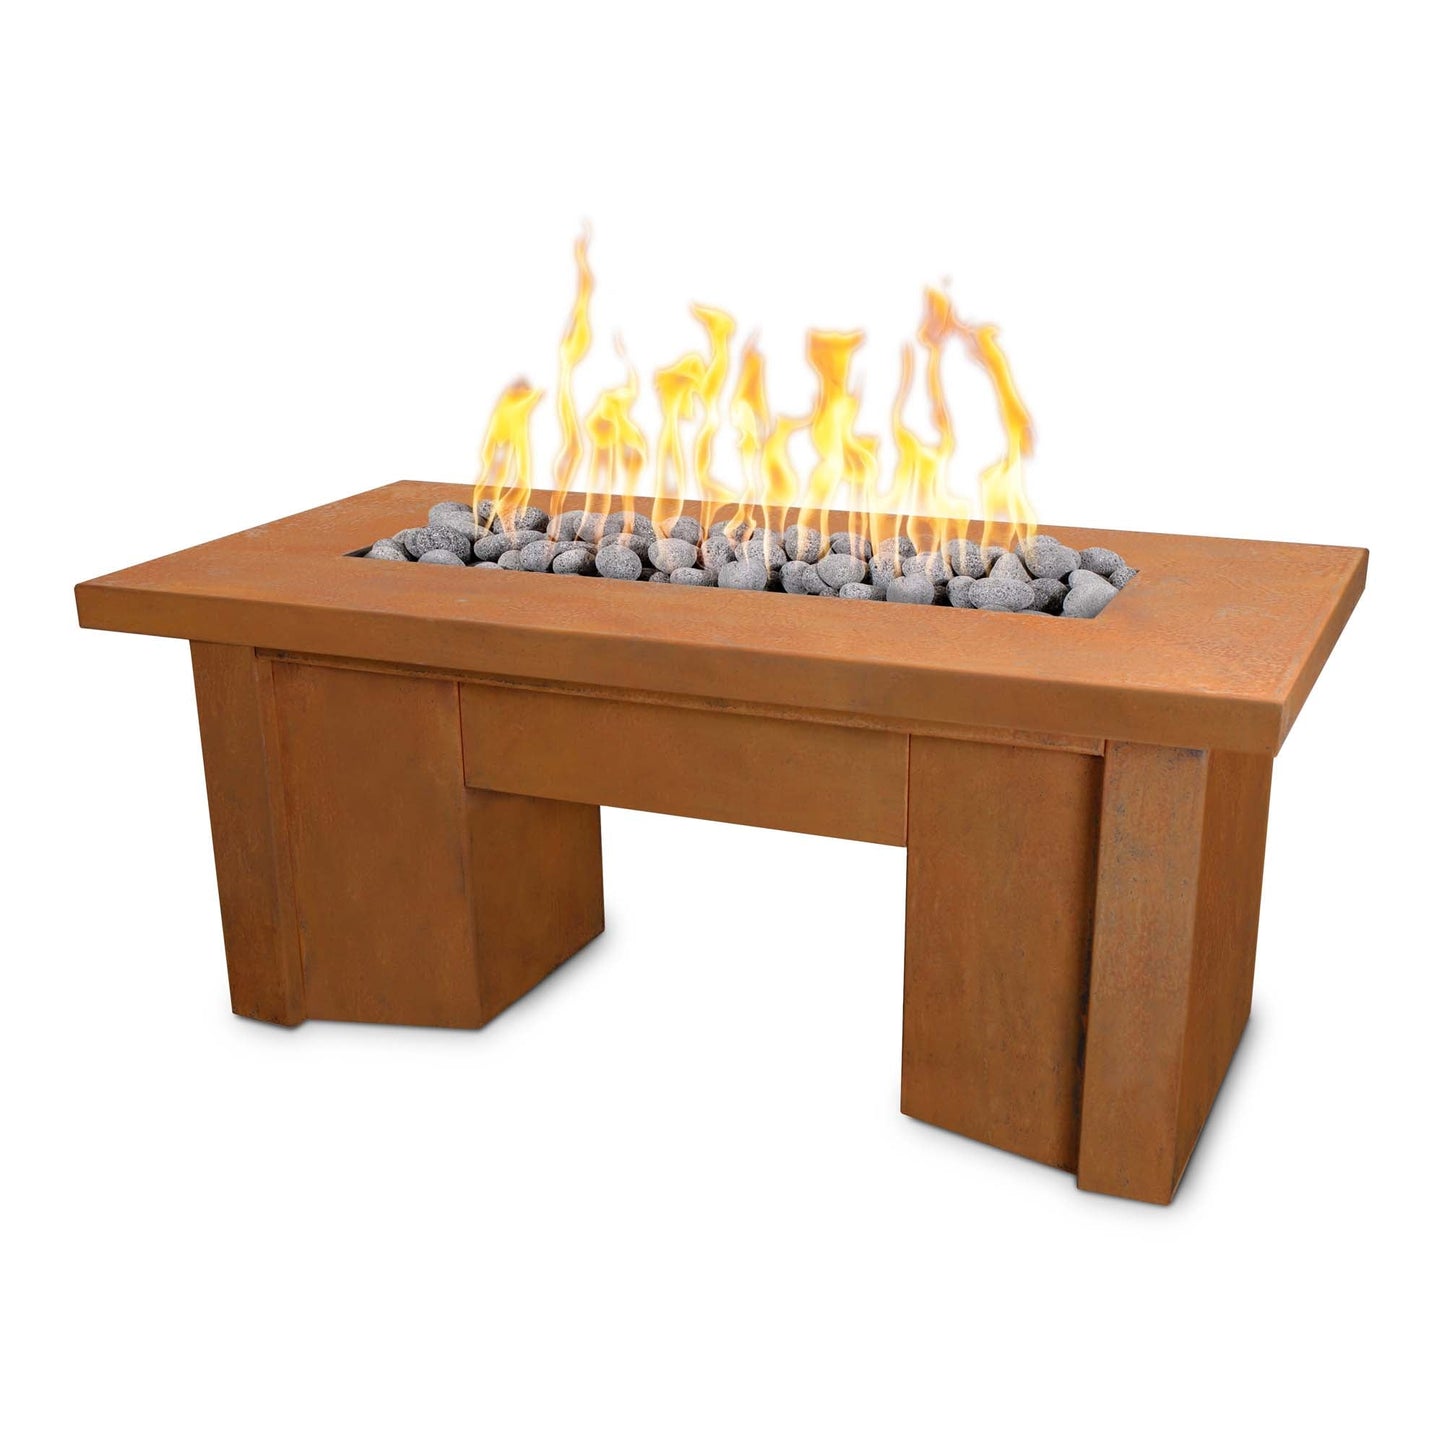 The Outdoor Plus Rectangular Alameda 60" Corten Steel Natural Gas Fire Pit with 12V Electronic Ignition